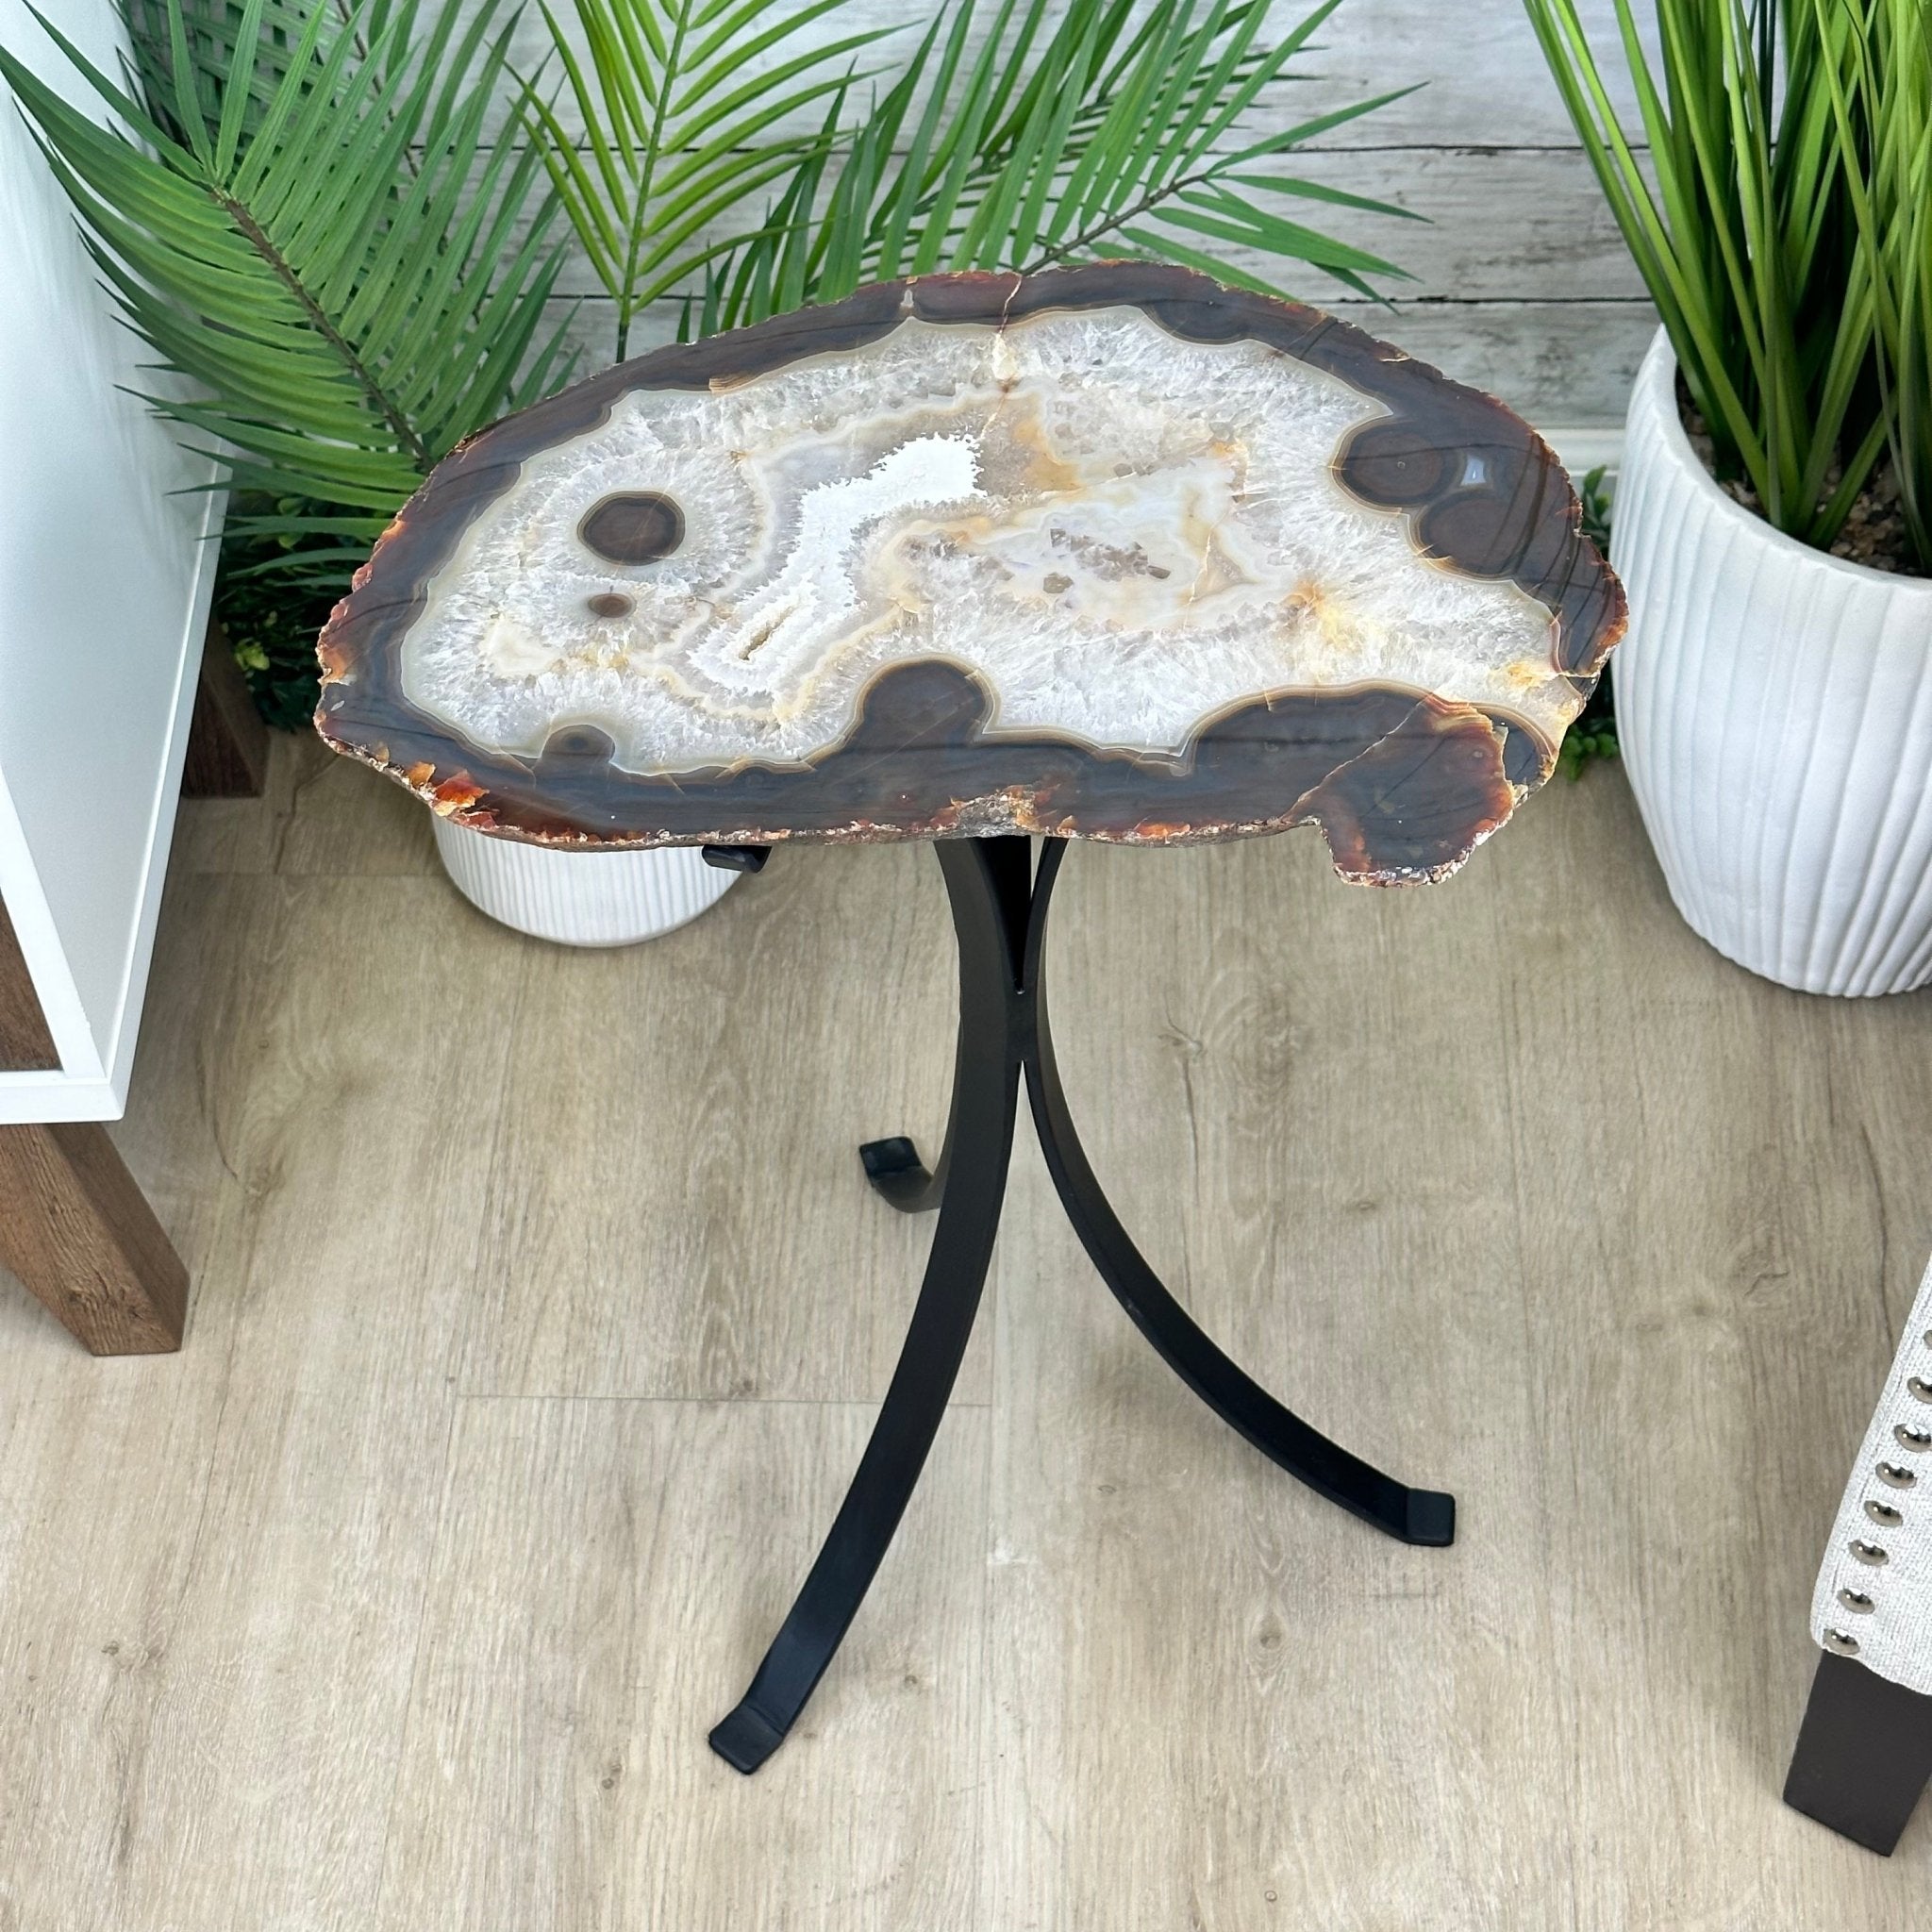 Natural Brazilian Agate Side Table on a black metal base, 22" tall #1305-0162 by Brazil Gems - Brazil GemsBrazil GemsNatural Brazilian Agate Side Table on a black metal base, 22" tall #1305-0162 by Brazil GemsTables: Side1305-0162